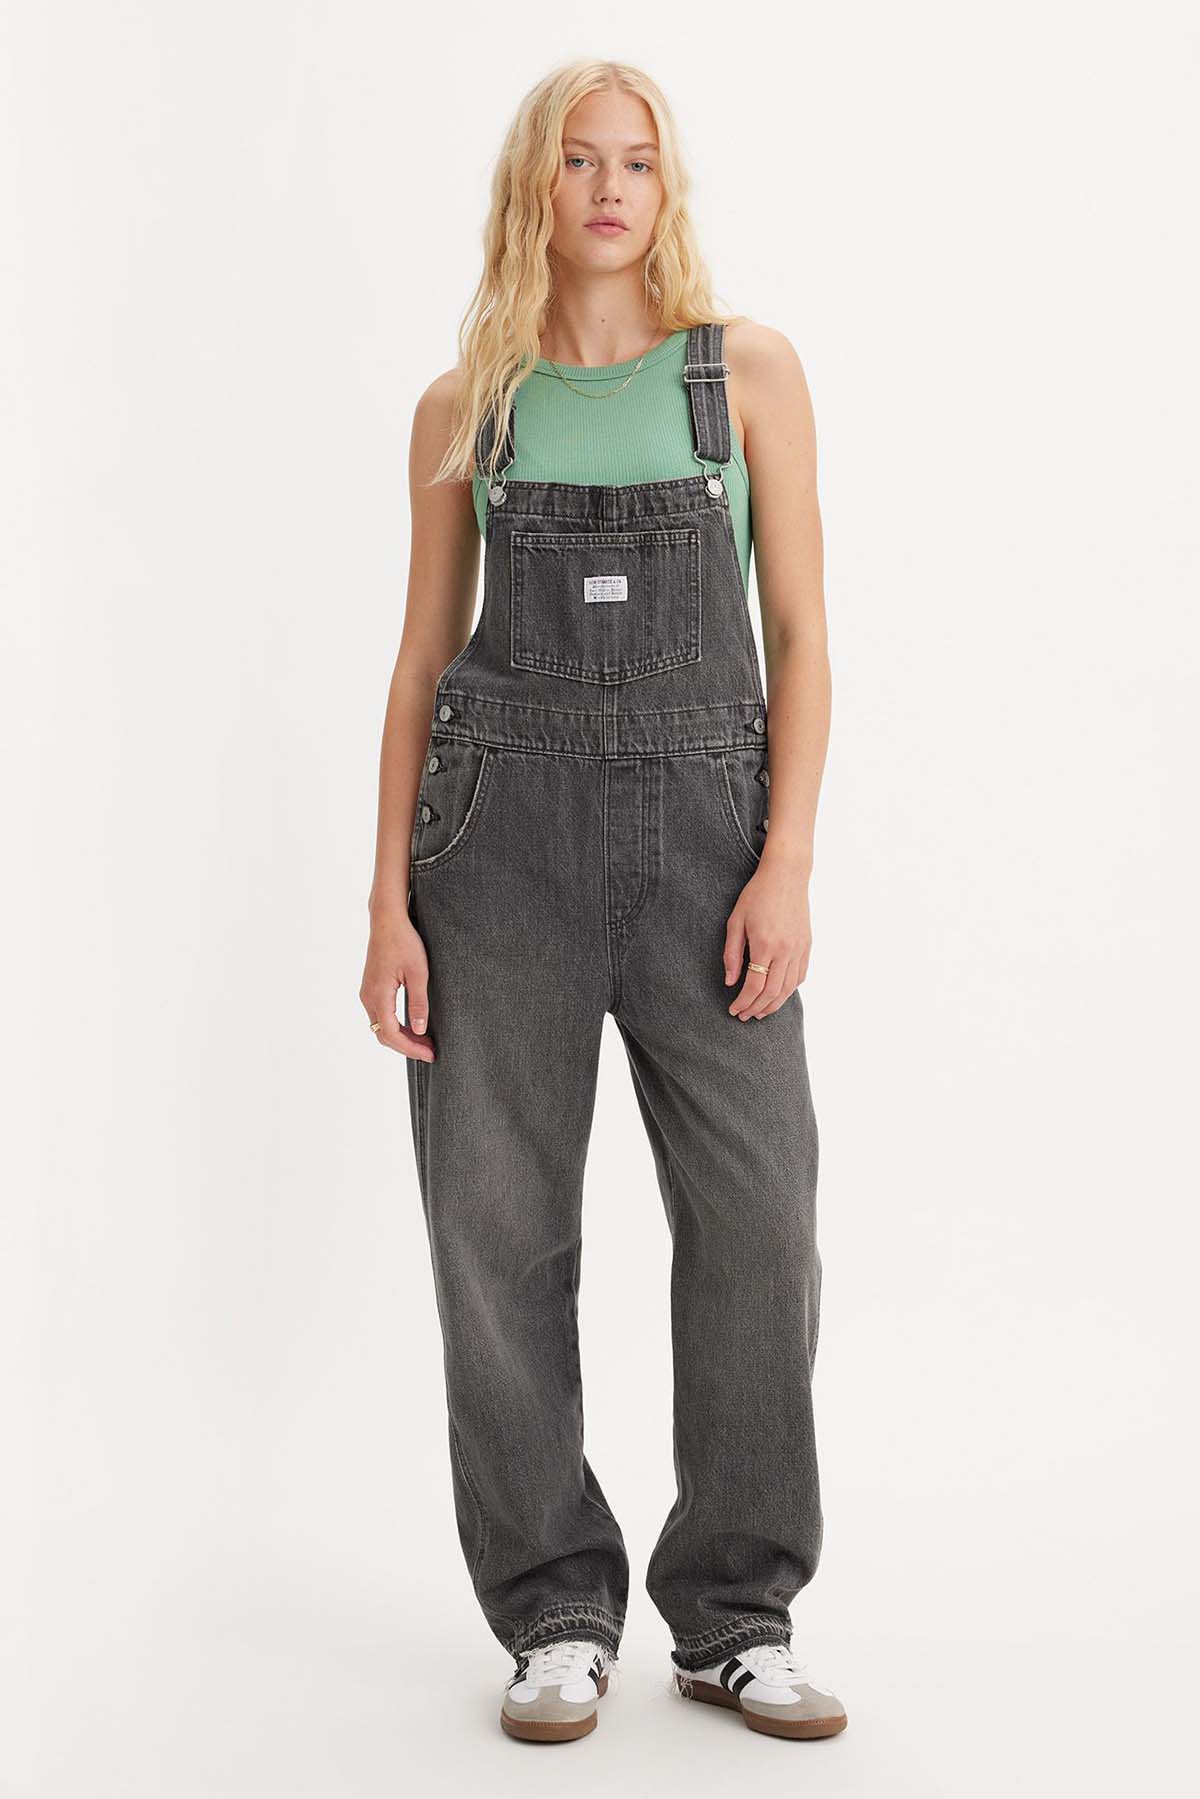 Levis - Vintage Overall - County Connection - Front